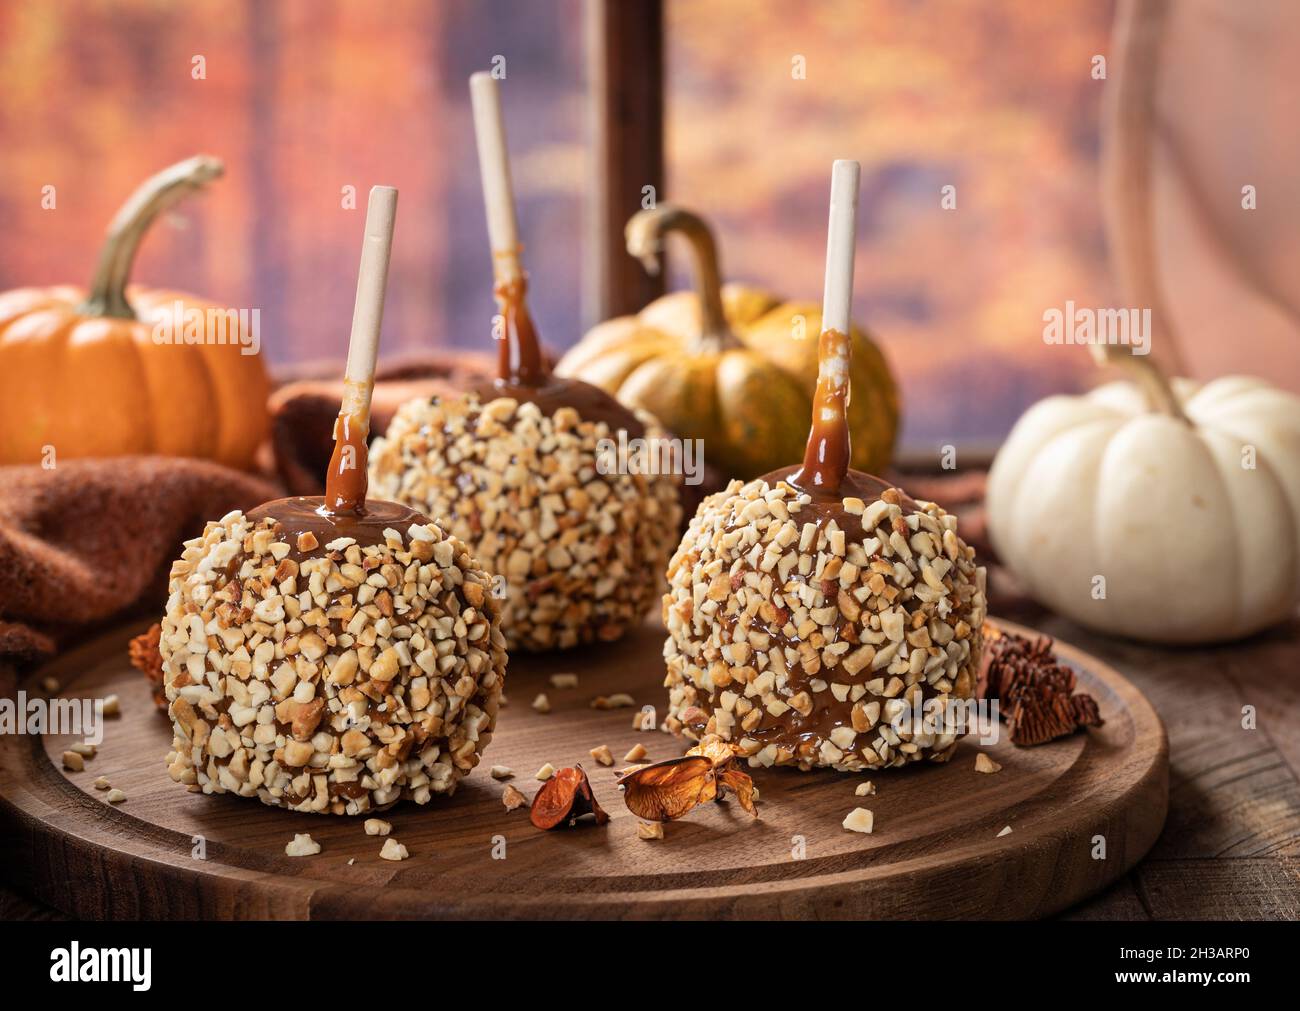 Caramel apples coated with nuts on a wooden platter with autumn background by a window Stock Photo